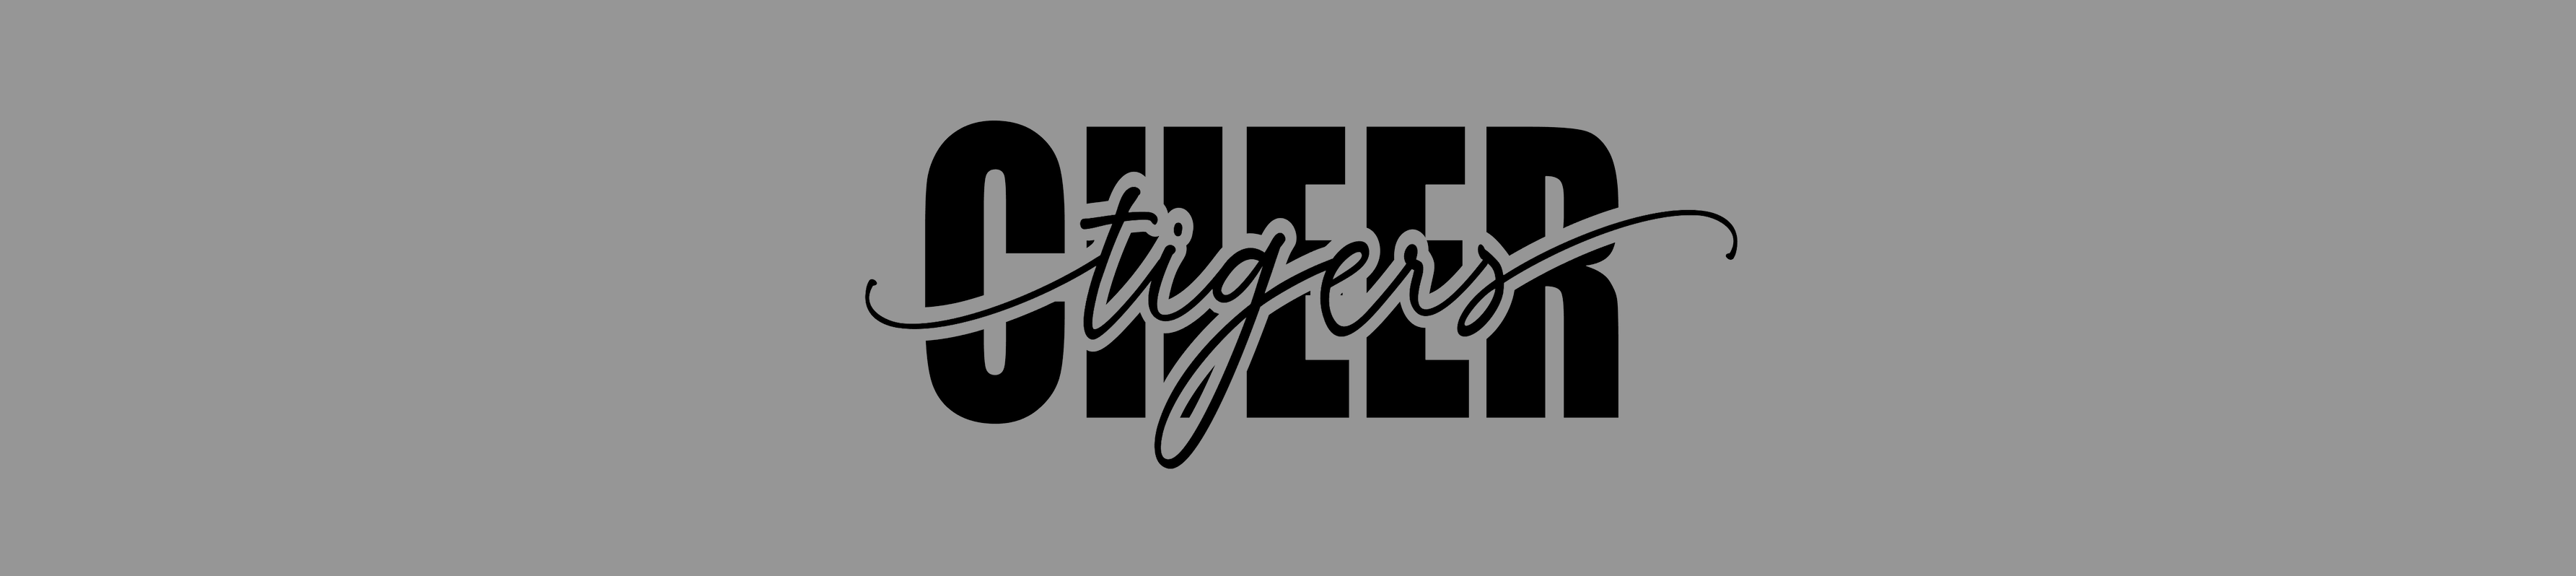 tigers cheer graphic